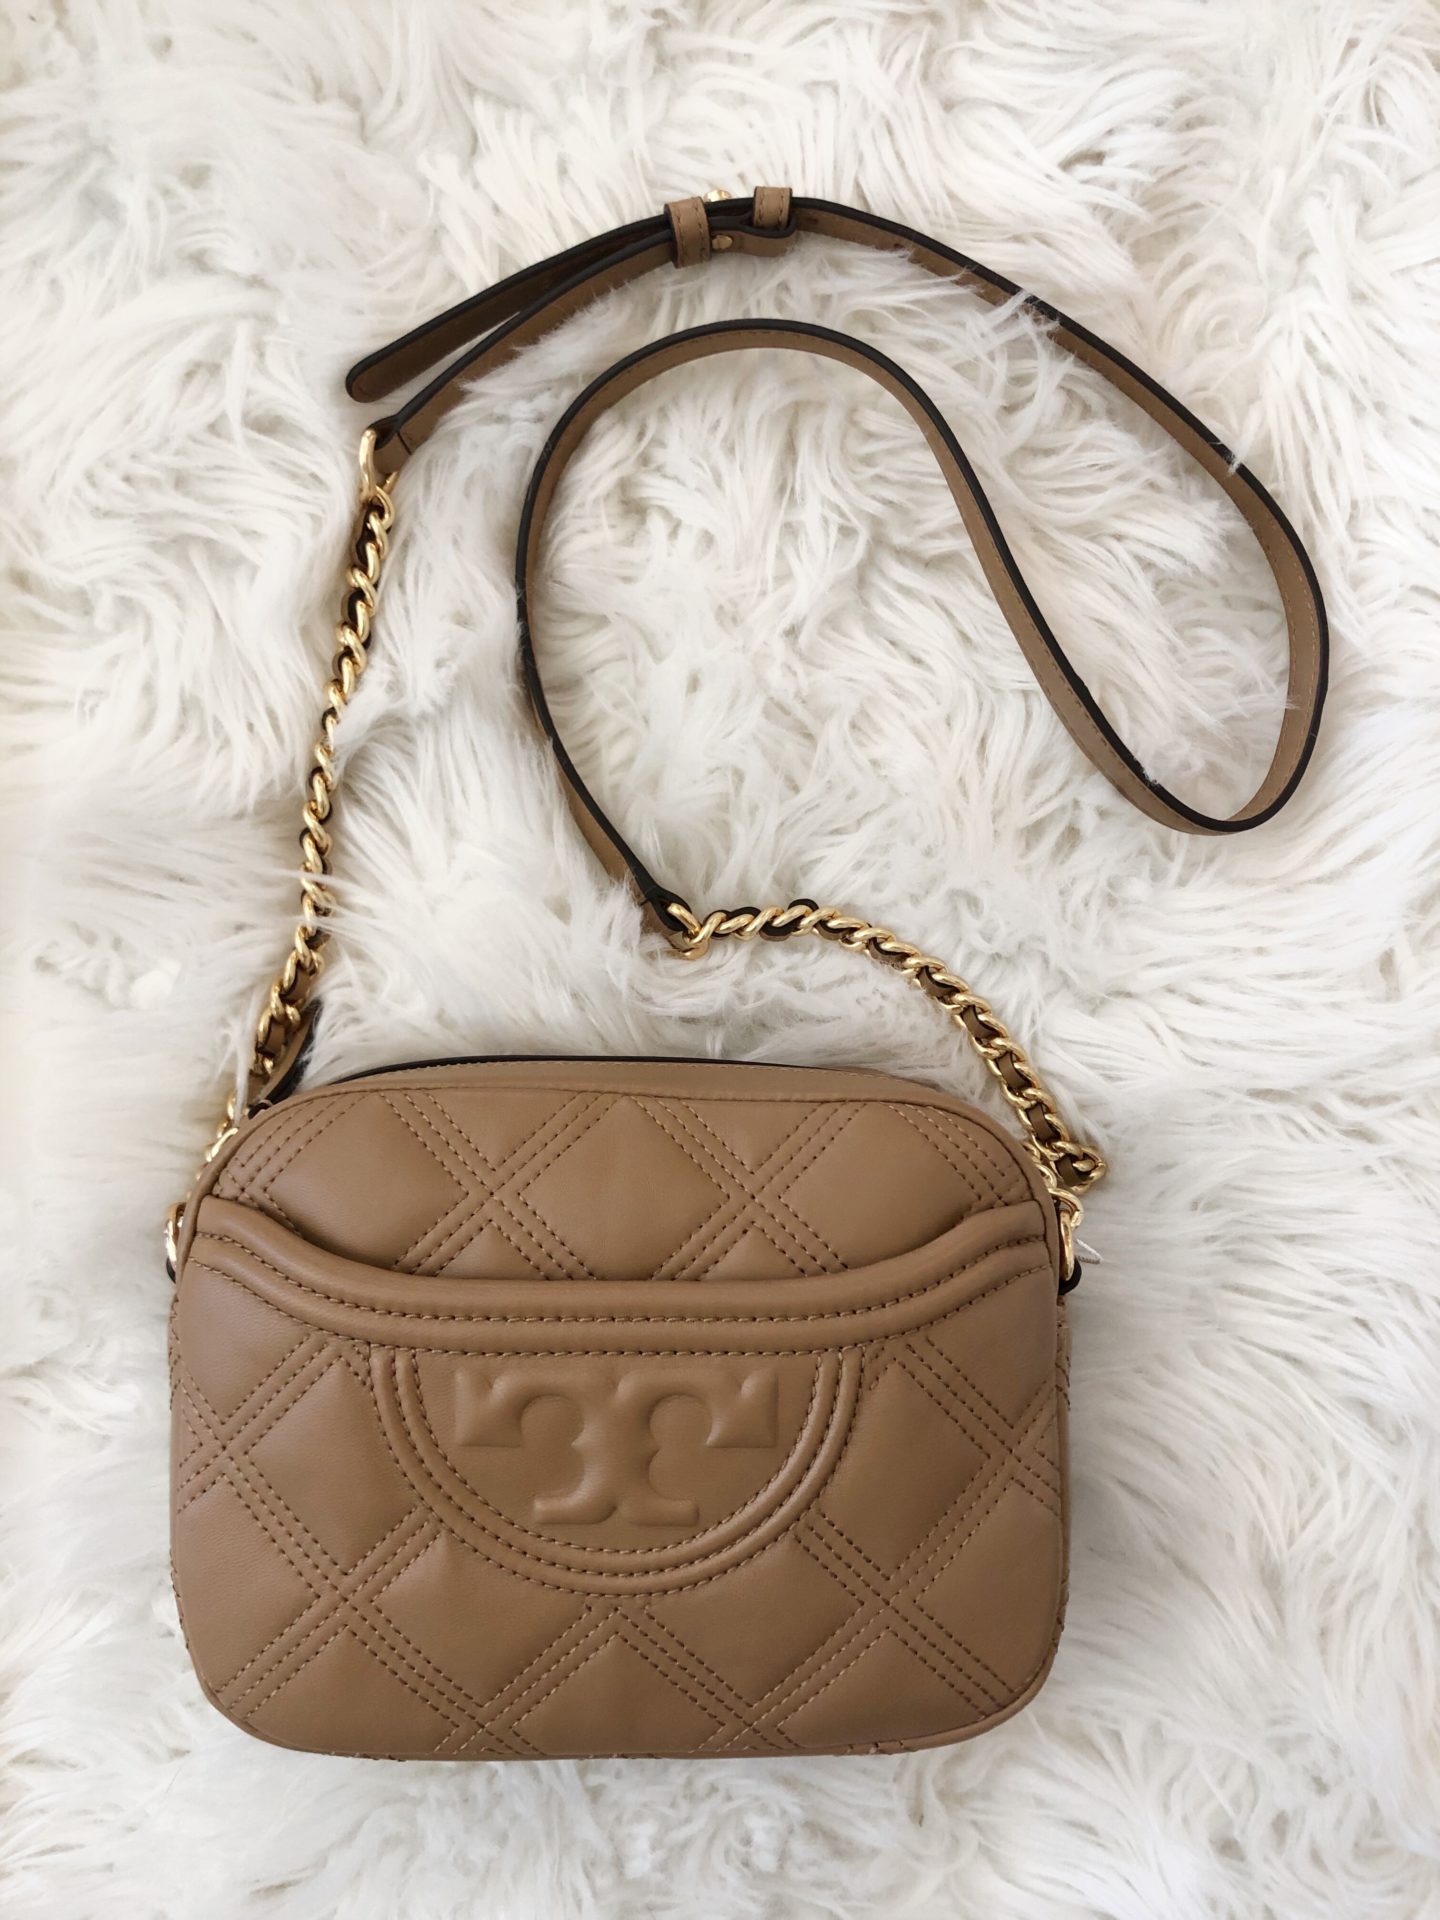 Tory Burch Private Sale 2021 Is Live! | Up To 70% Off!! - The Double ...